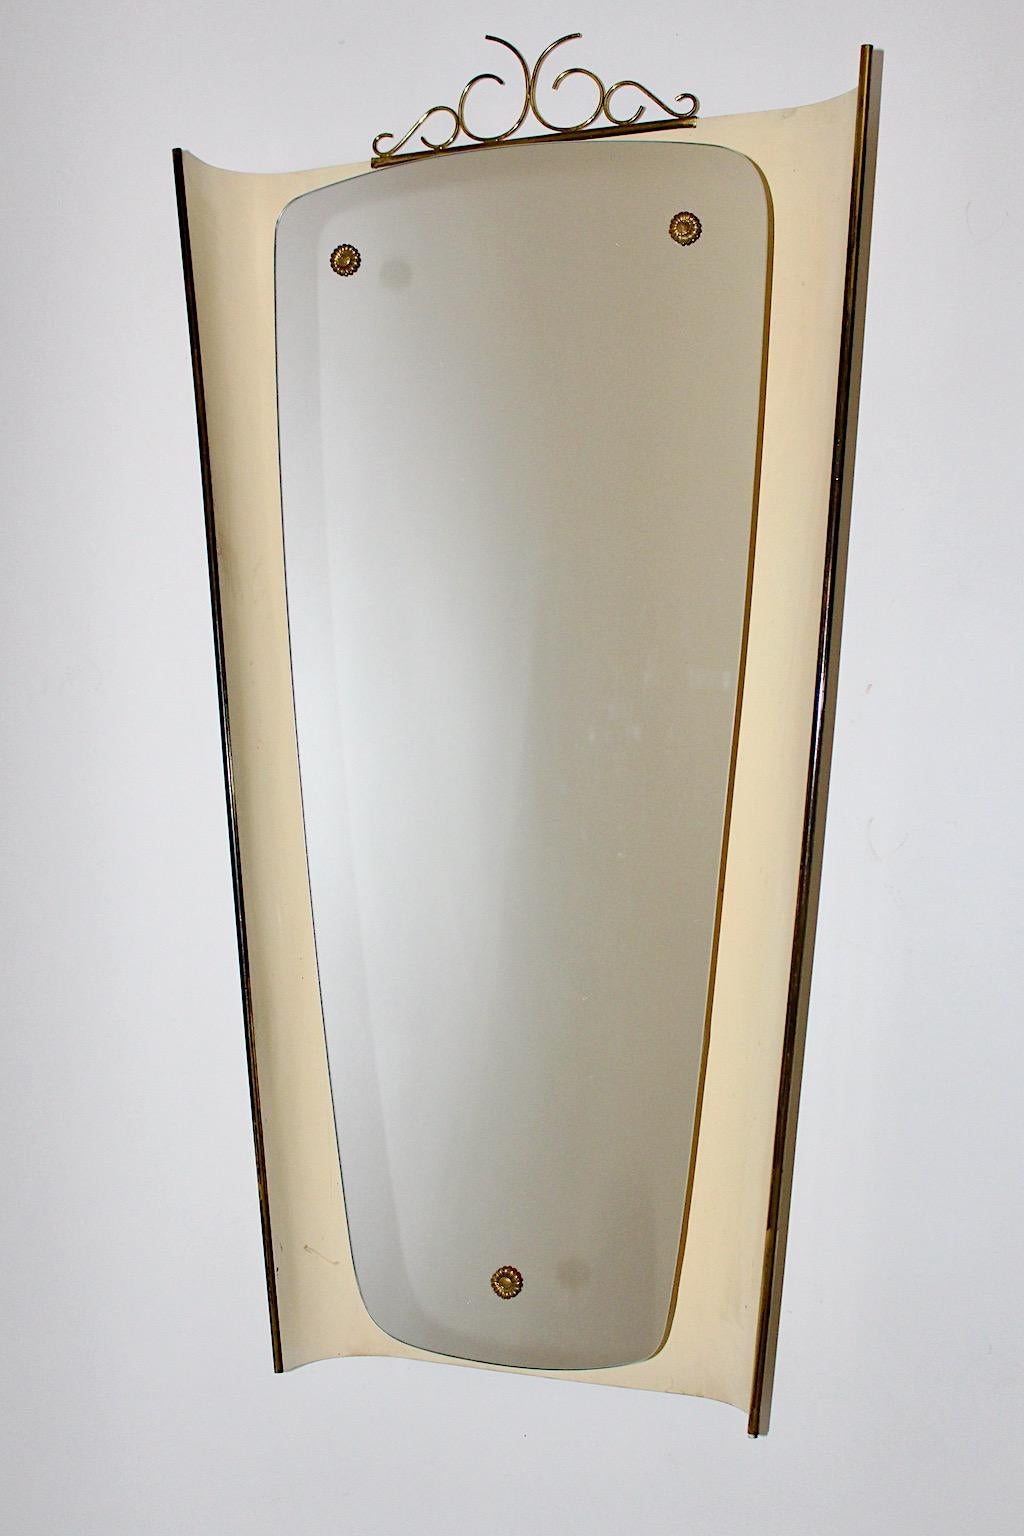 Mid Century Modern Vintage wall mirror with backlit in ivory lacquered metal and brass details 1950s Germany.
While the vintage wall mirror features a slightly curved ivory lacquered metal frame shield like with amazing brass details like loops at